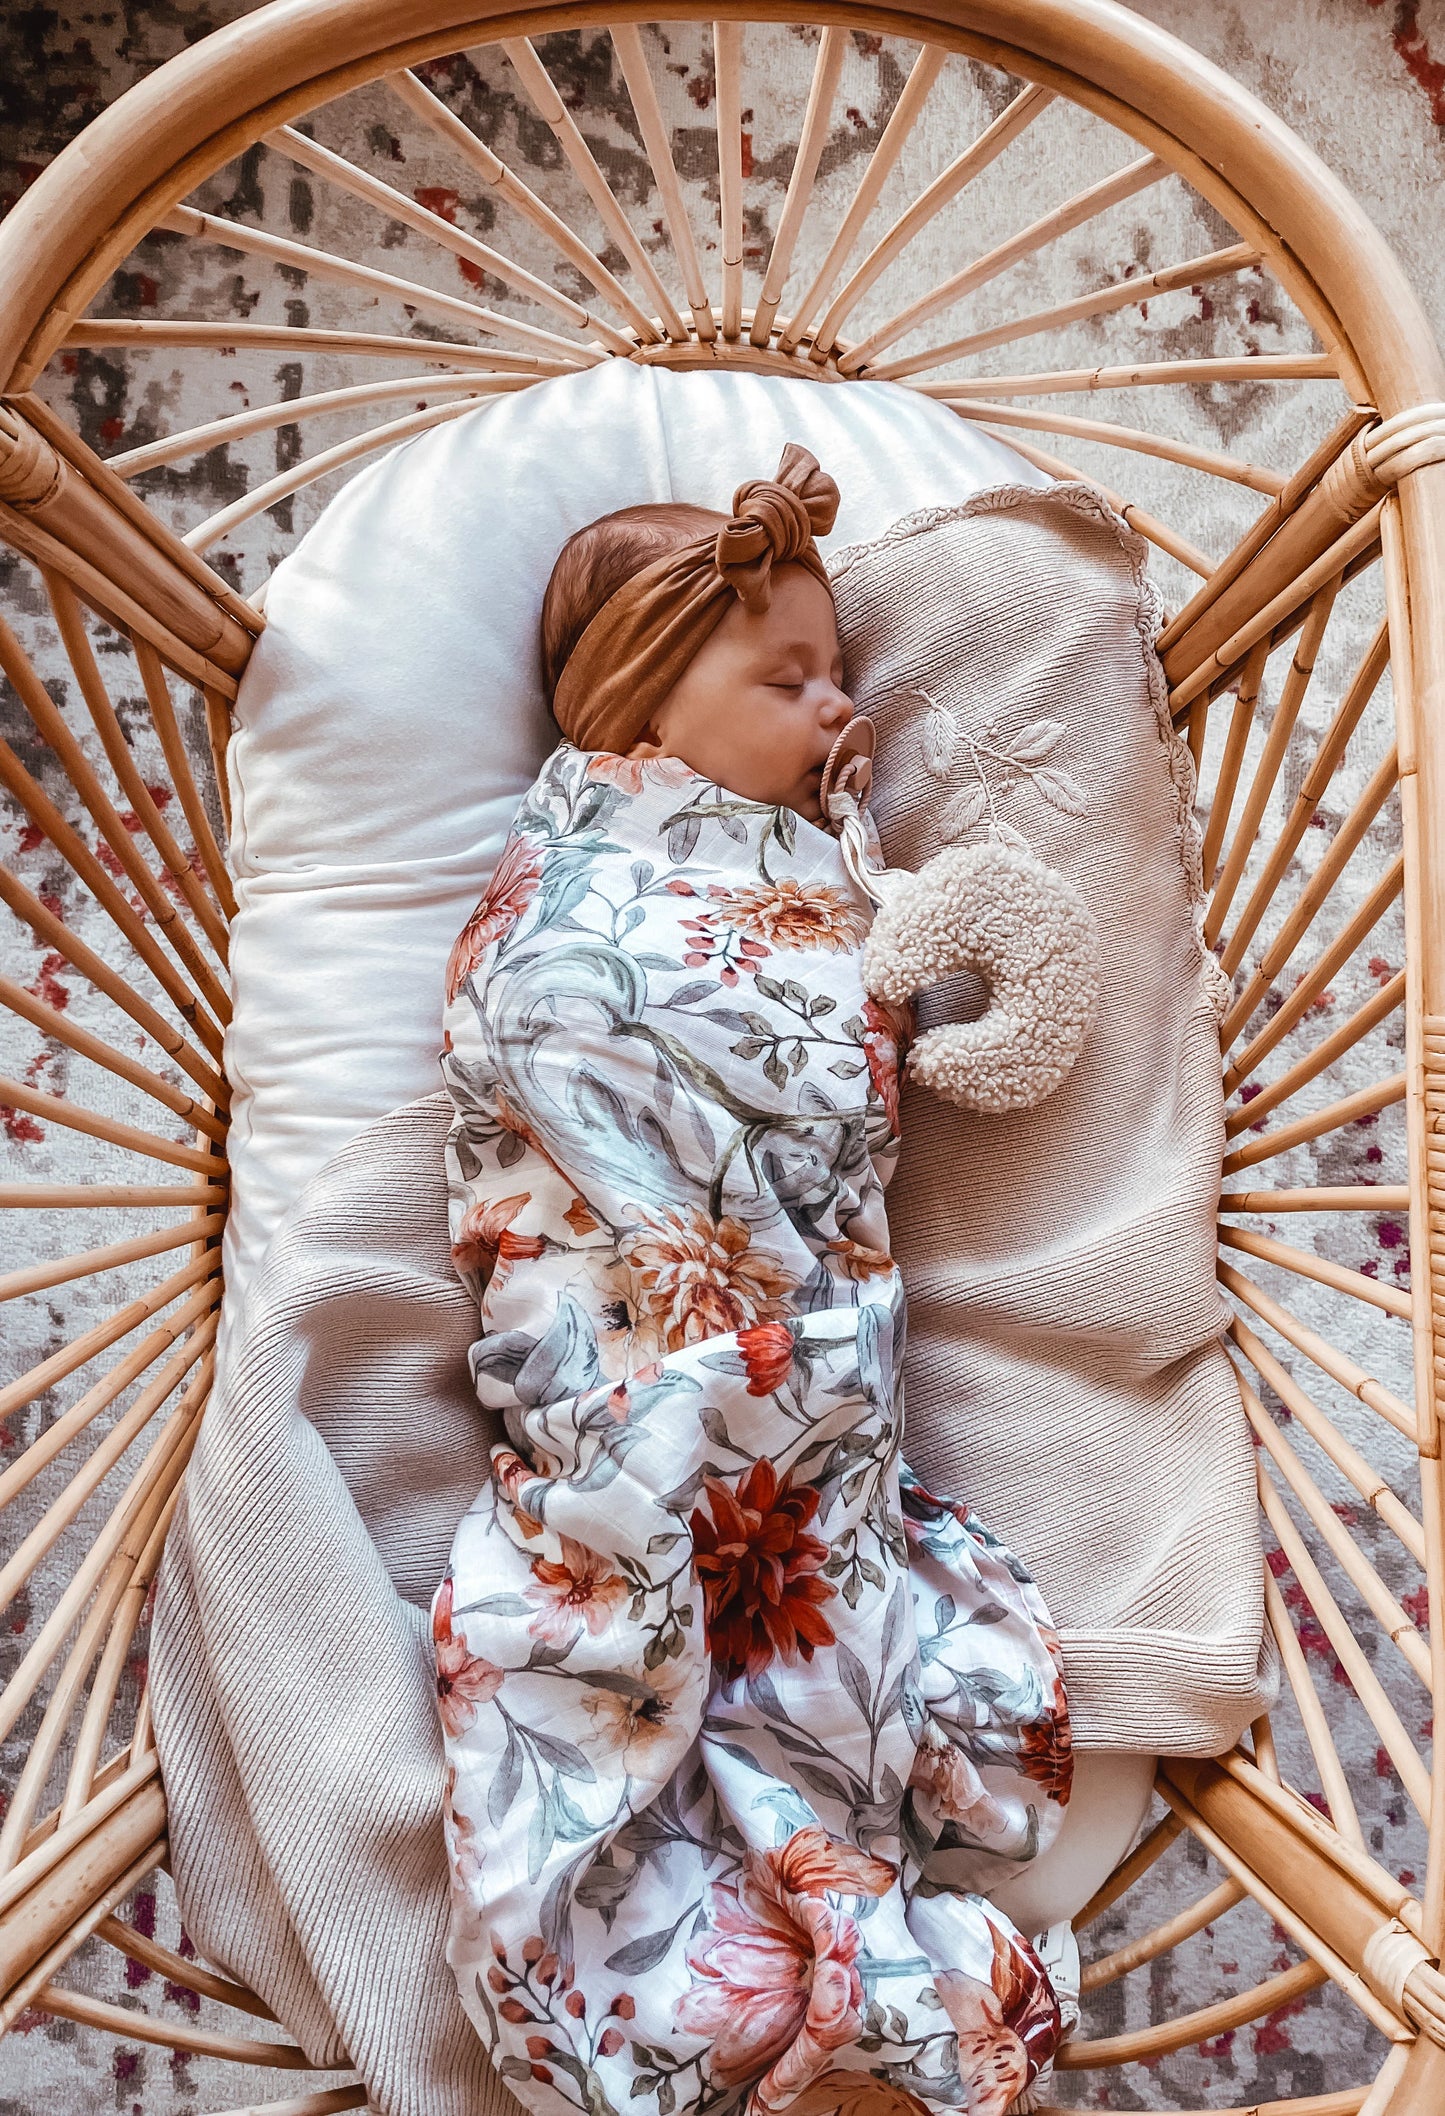 Printed Cotton Muslin Swaddle